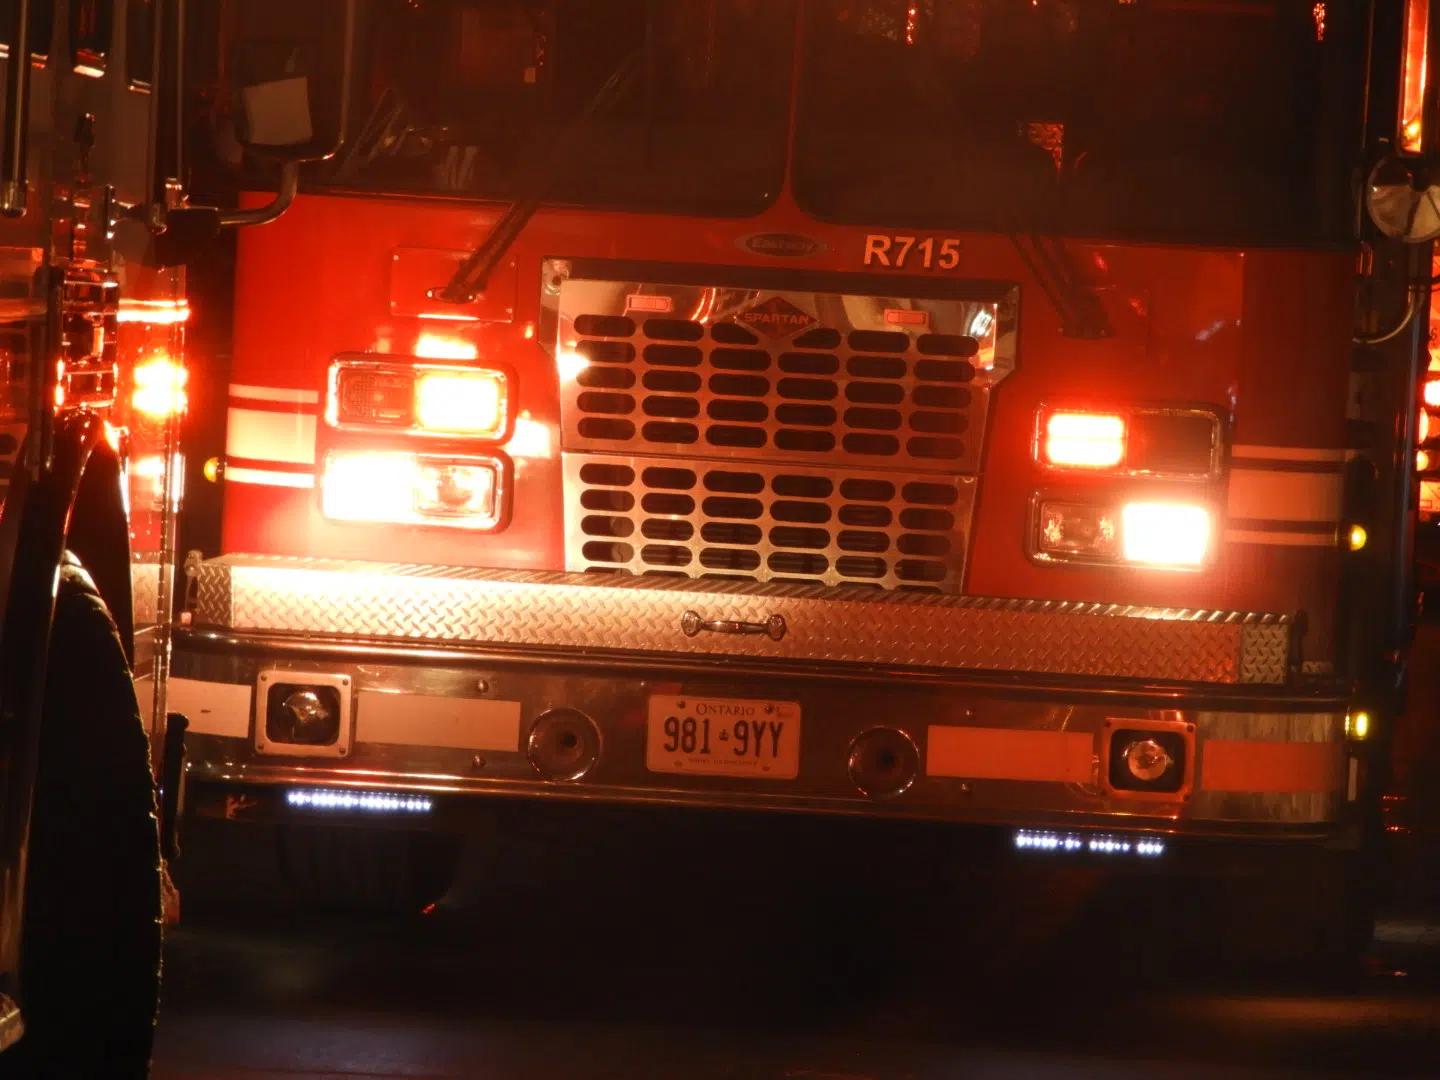 Structure fire in Madoc Township